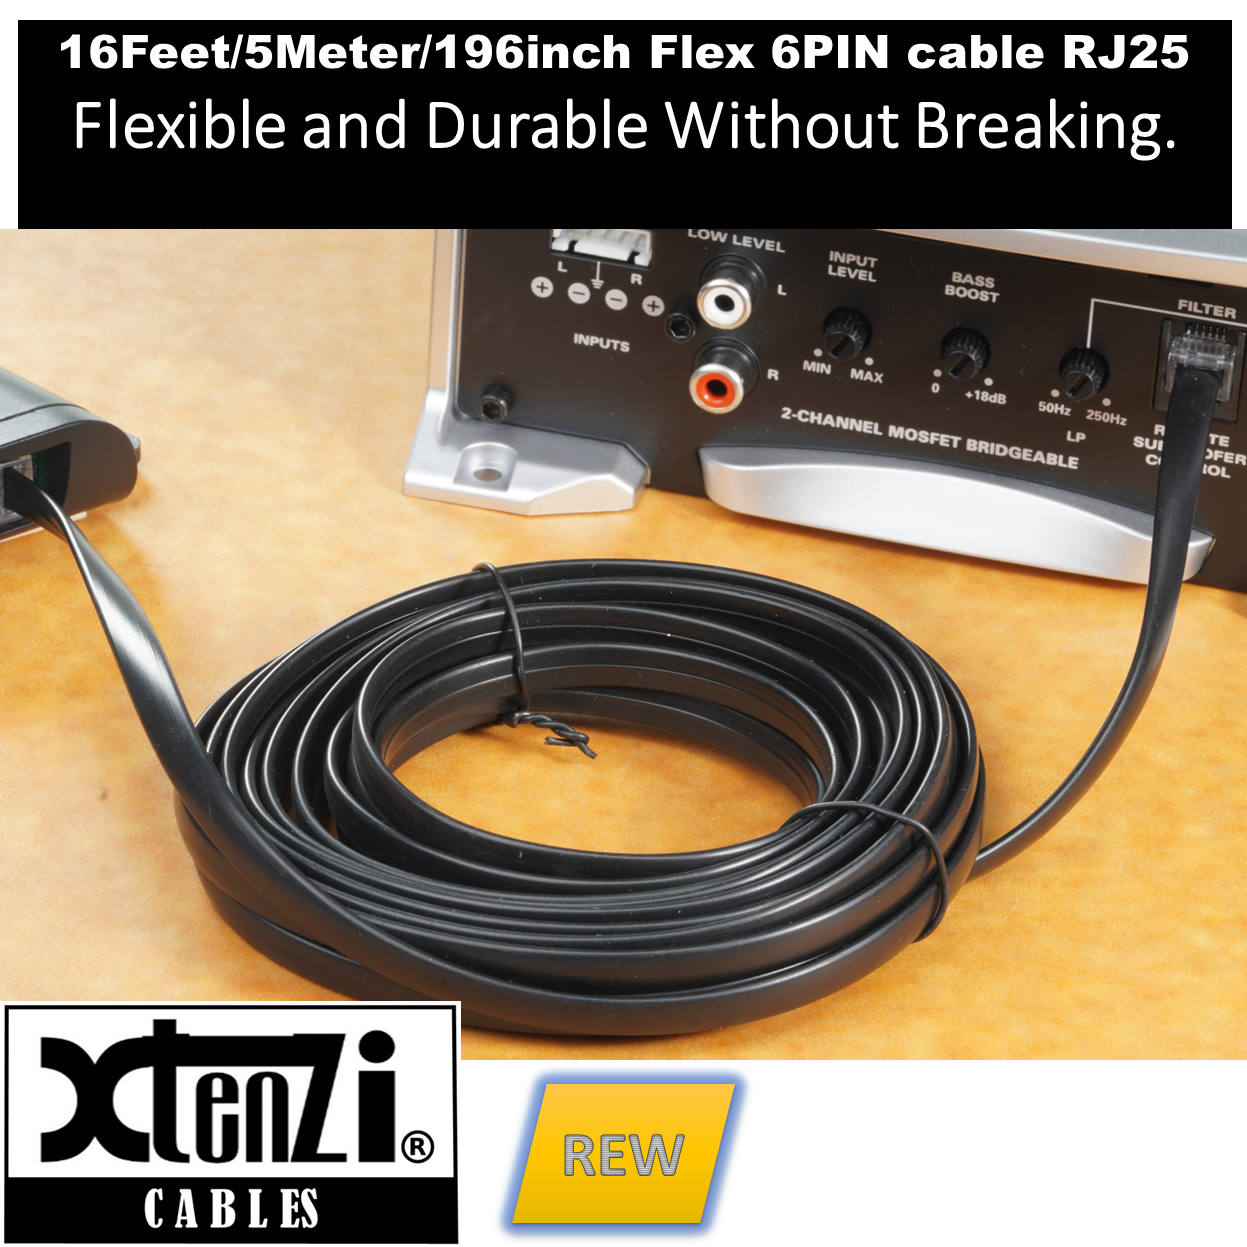 Xtenzi 6Pin Remote Bass Knob 15FT-REW FlexCable for Infinity Reference Amplifier